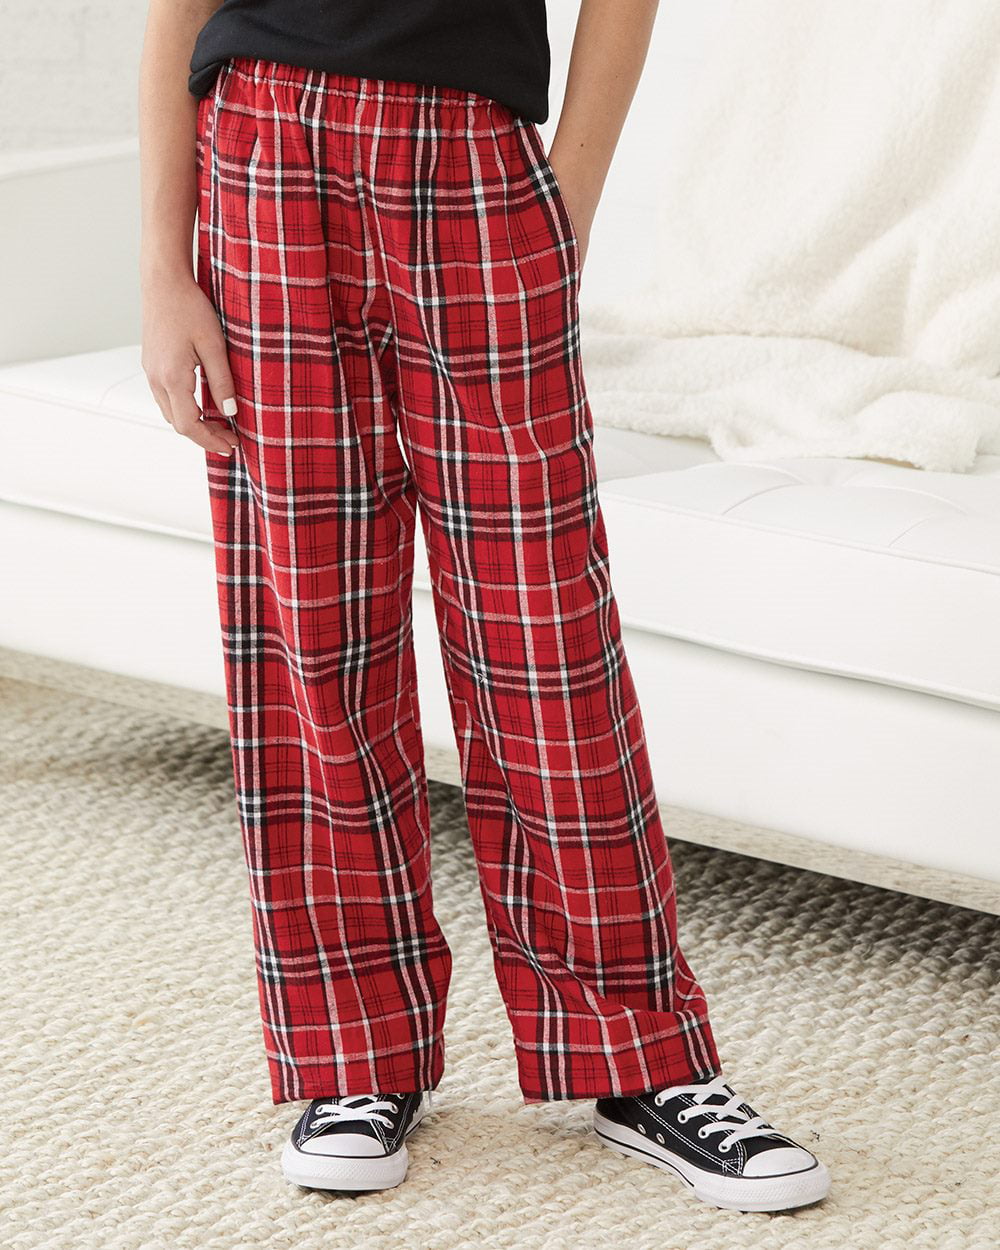 Hometown Clothing Bundle: Boxercraft Flannel Pant & 10% off for a future purchase with us, Royal Blue - Walmart.com